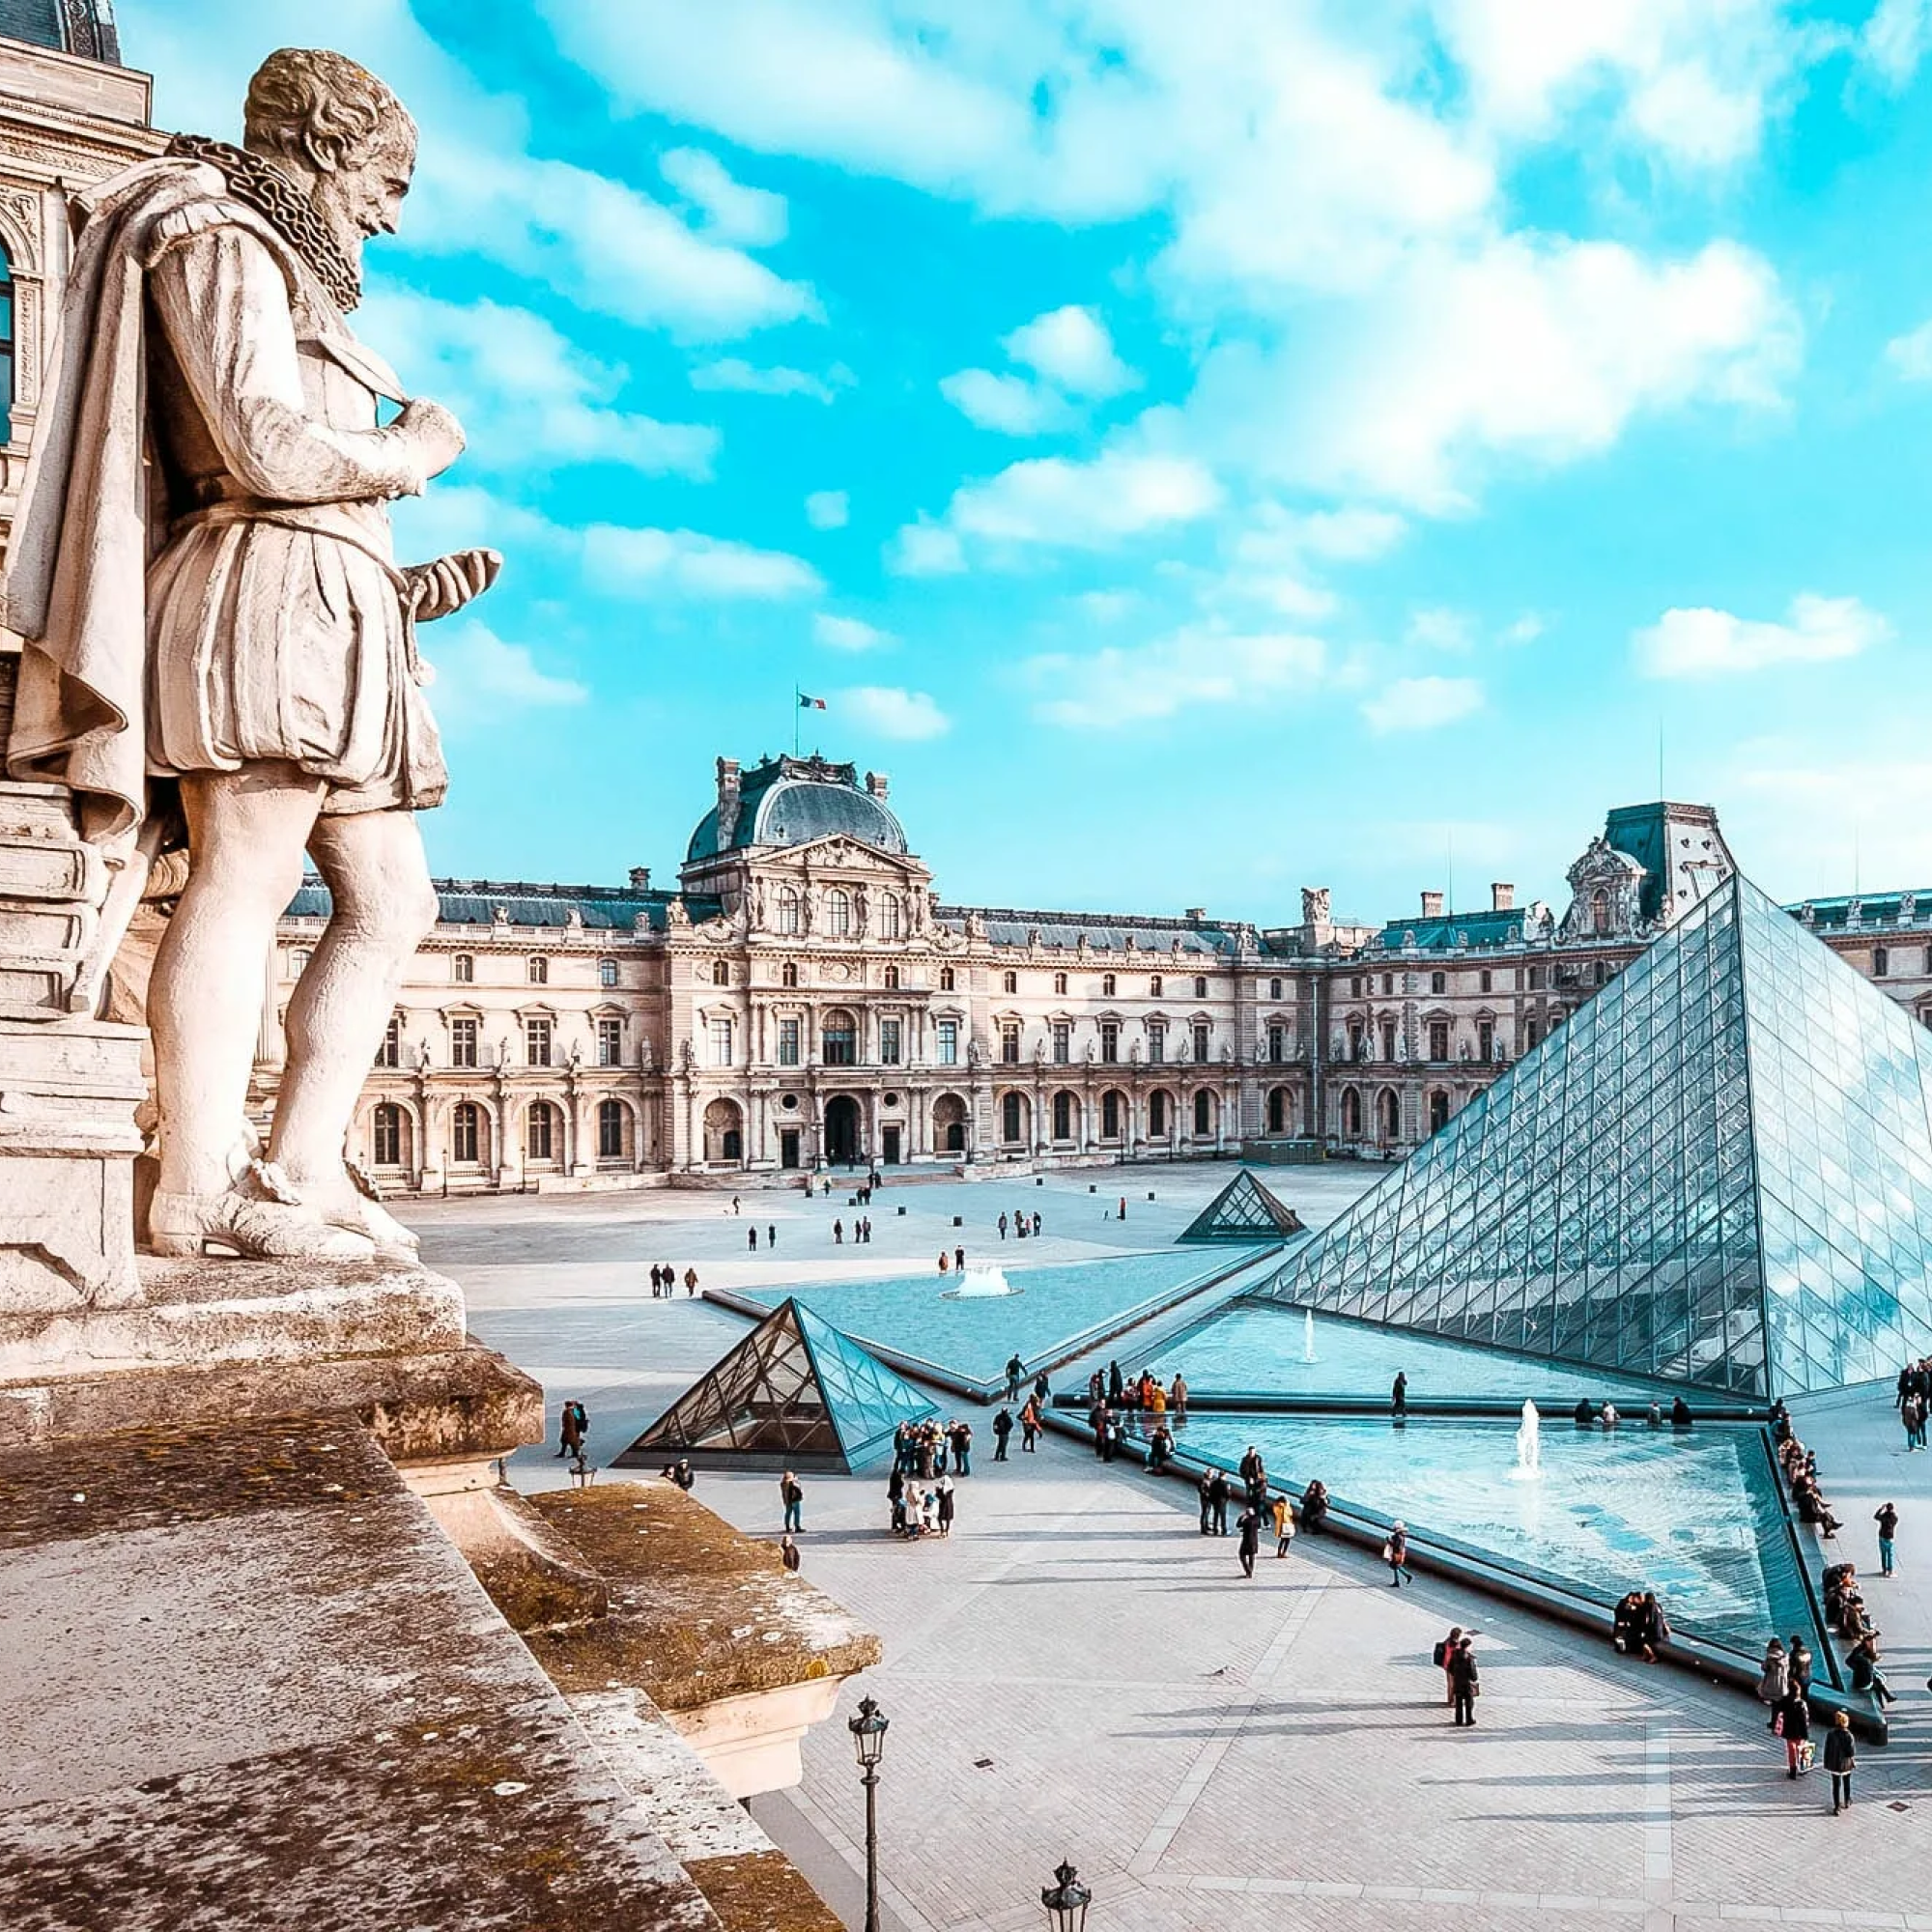 The 10 best places to visit in Paris, France